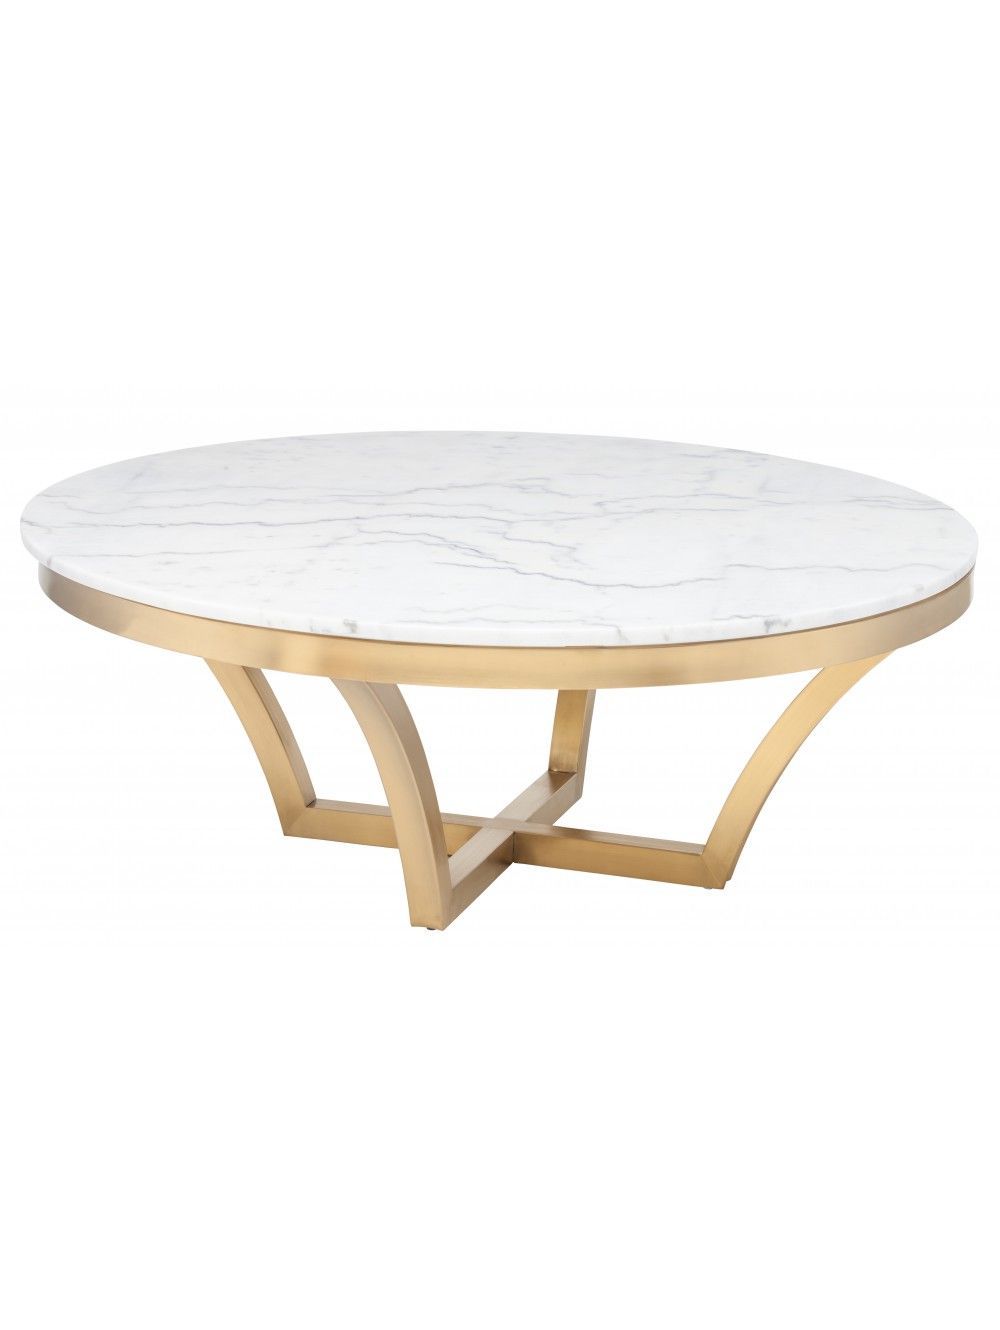 Emmette Coffee Table, White Marble | Coffee Table White Within White Marble And Gold Coffee Tables (View 3 of 15)